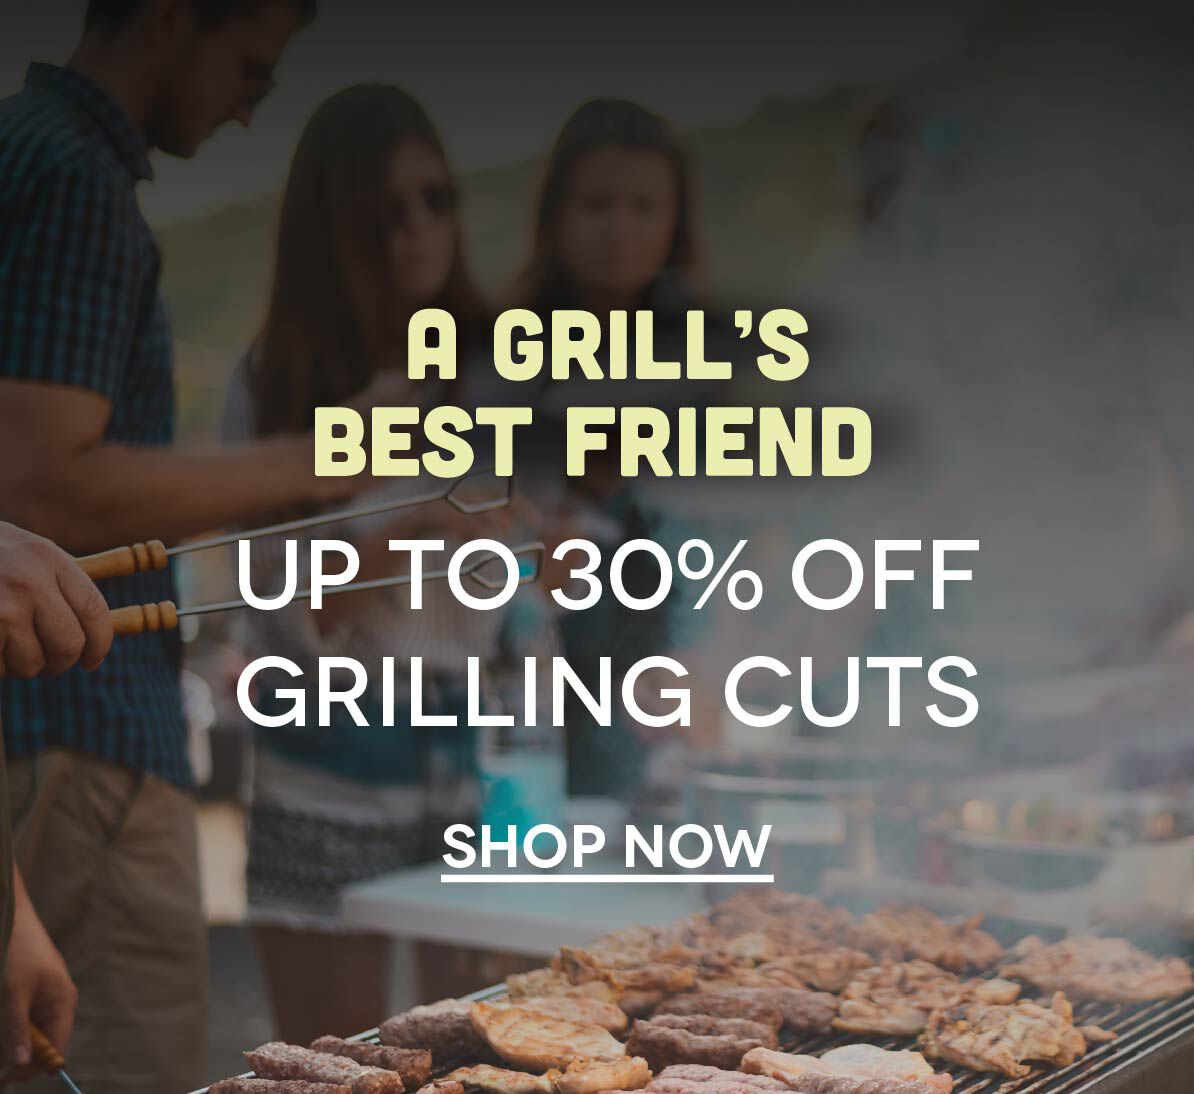 Fill your grill and save up to 30%